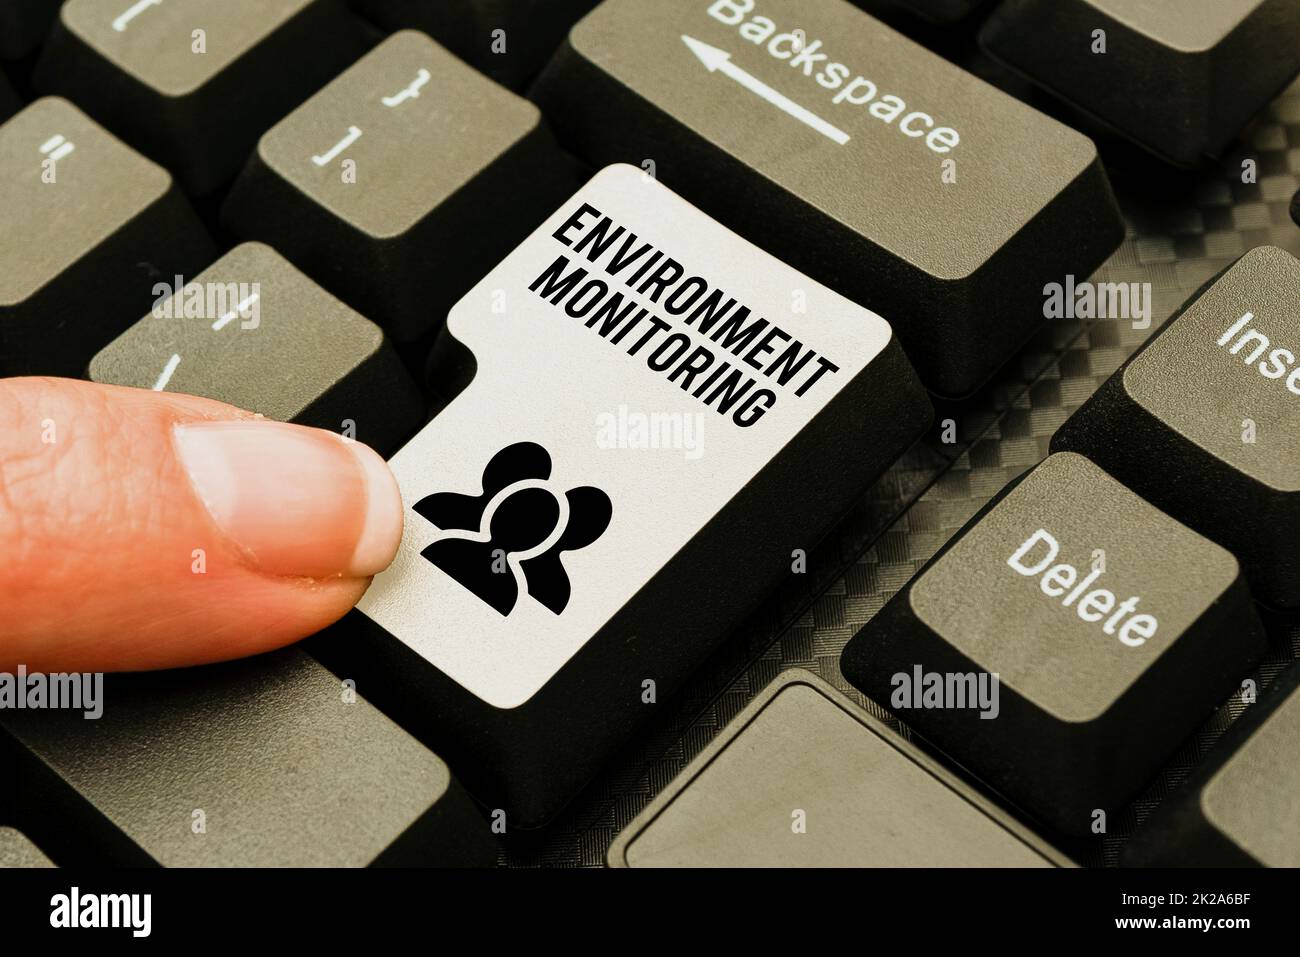 Writing displaying text Environment Monitoring. Business approach basis of production of natural impact assessments Filling Up Online Registration Forms, Gathering And Editing Internet Data Stock Photo